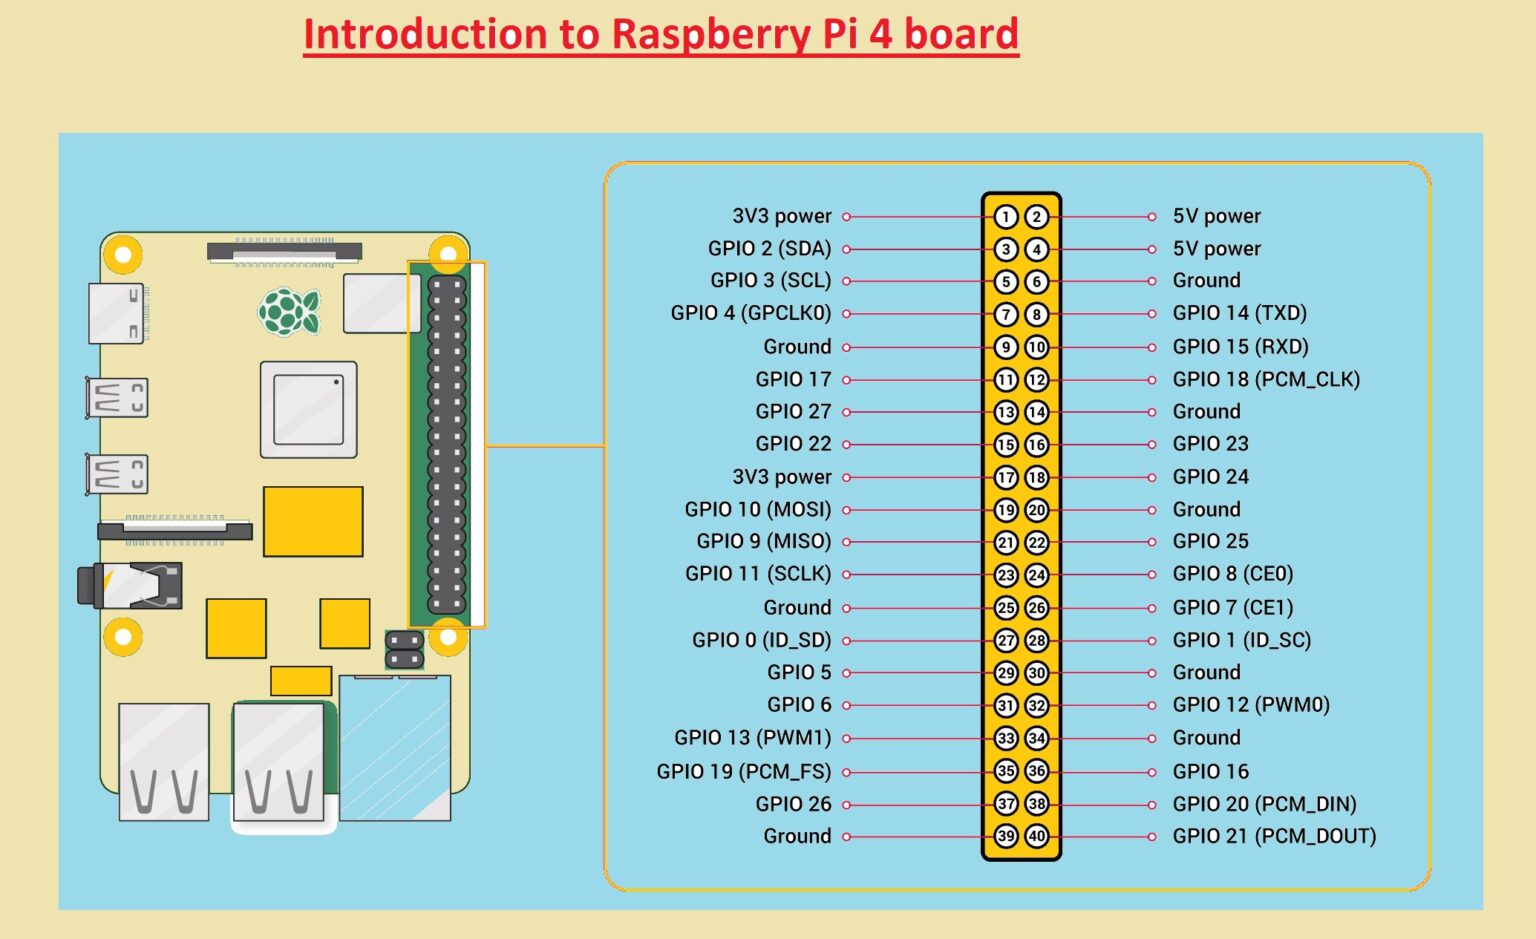 Introduction To Raspberry Pi 4 Pinout Working Pinout Features And Applications The 9384